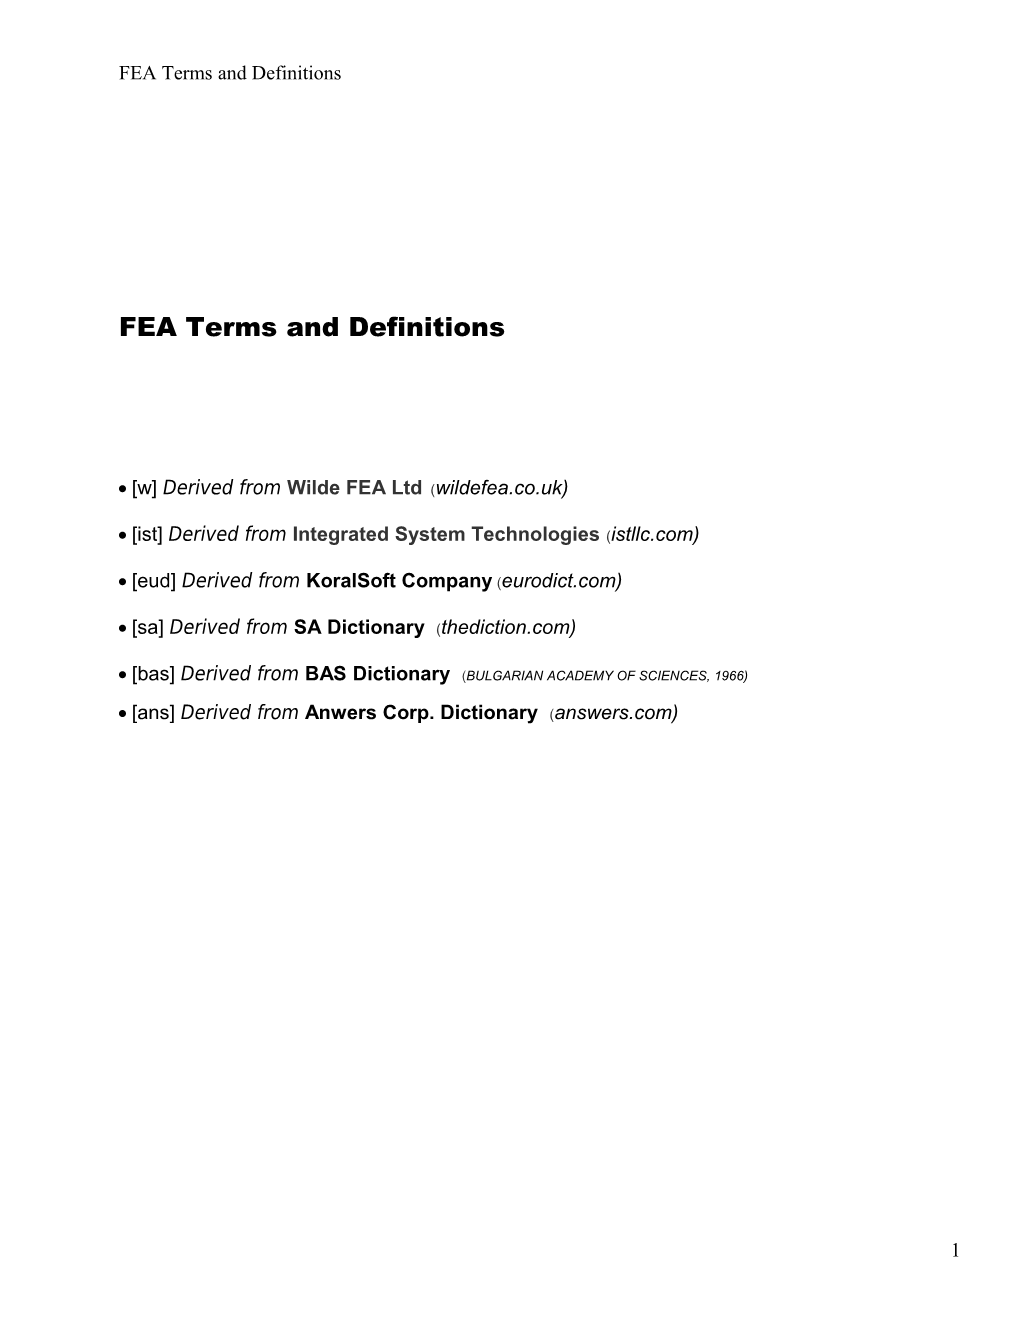 FEA Terms and Definitions